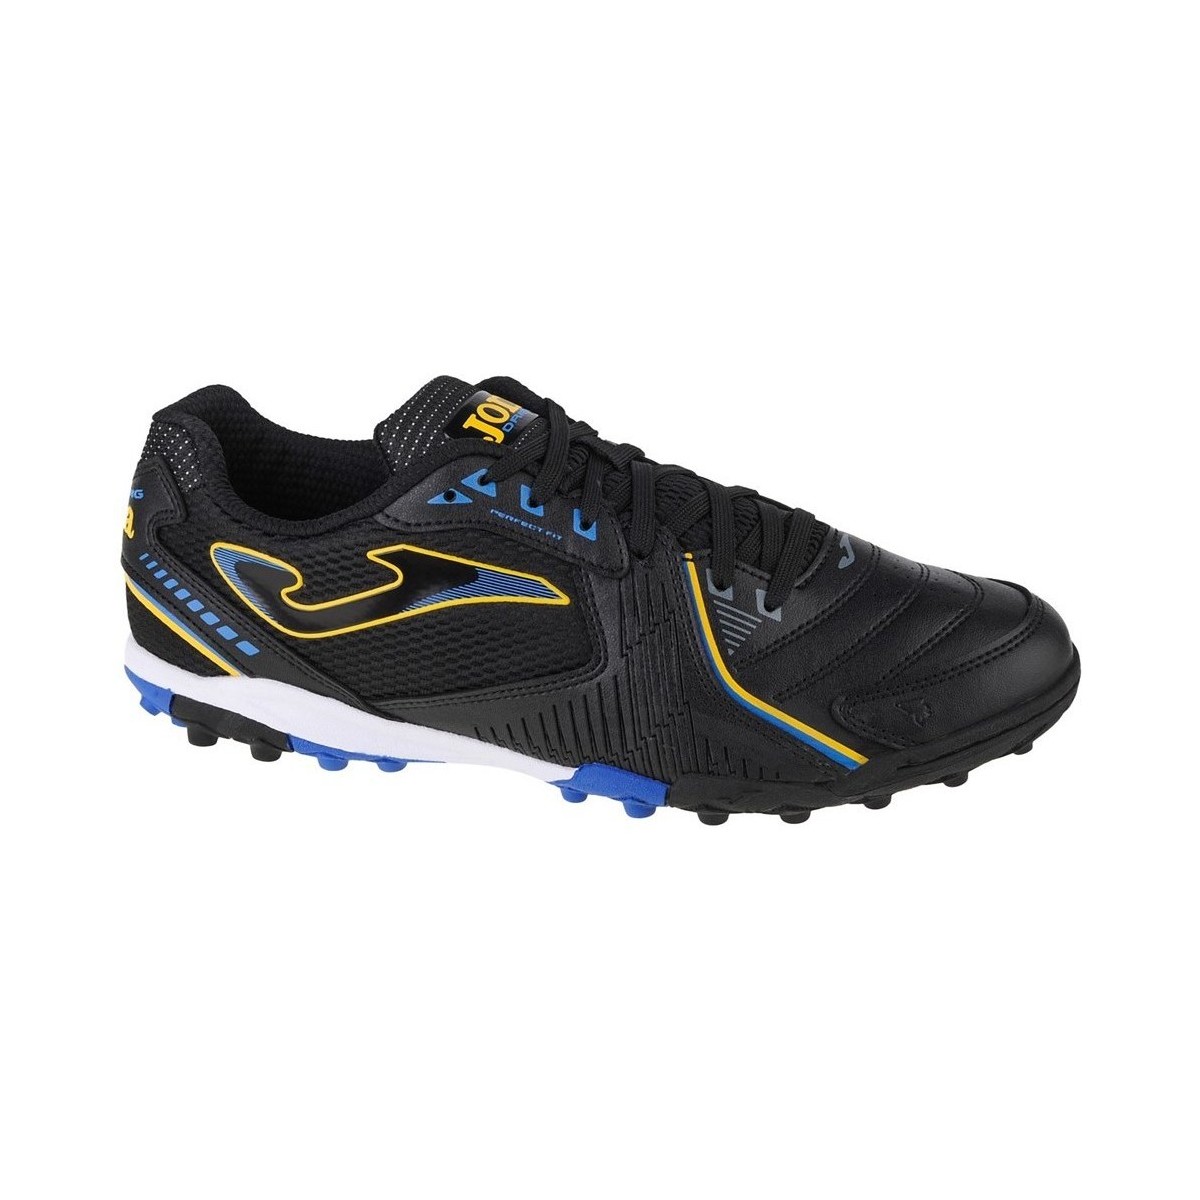 Chaussures Homme Baskets basses Joma Dribling 2201 TF Noir